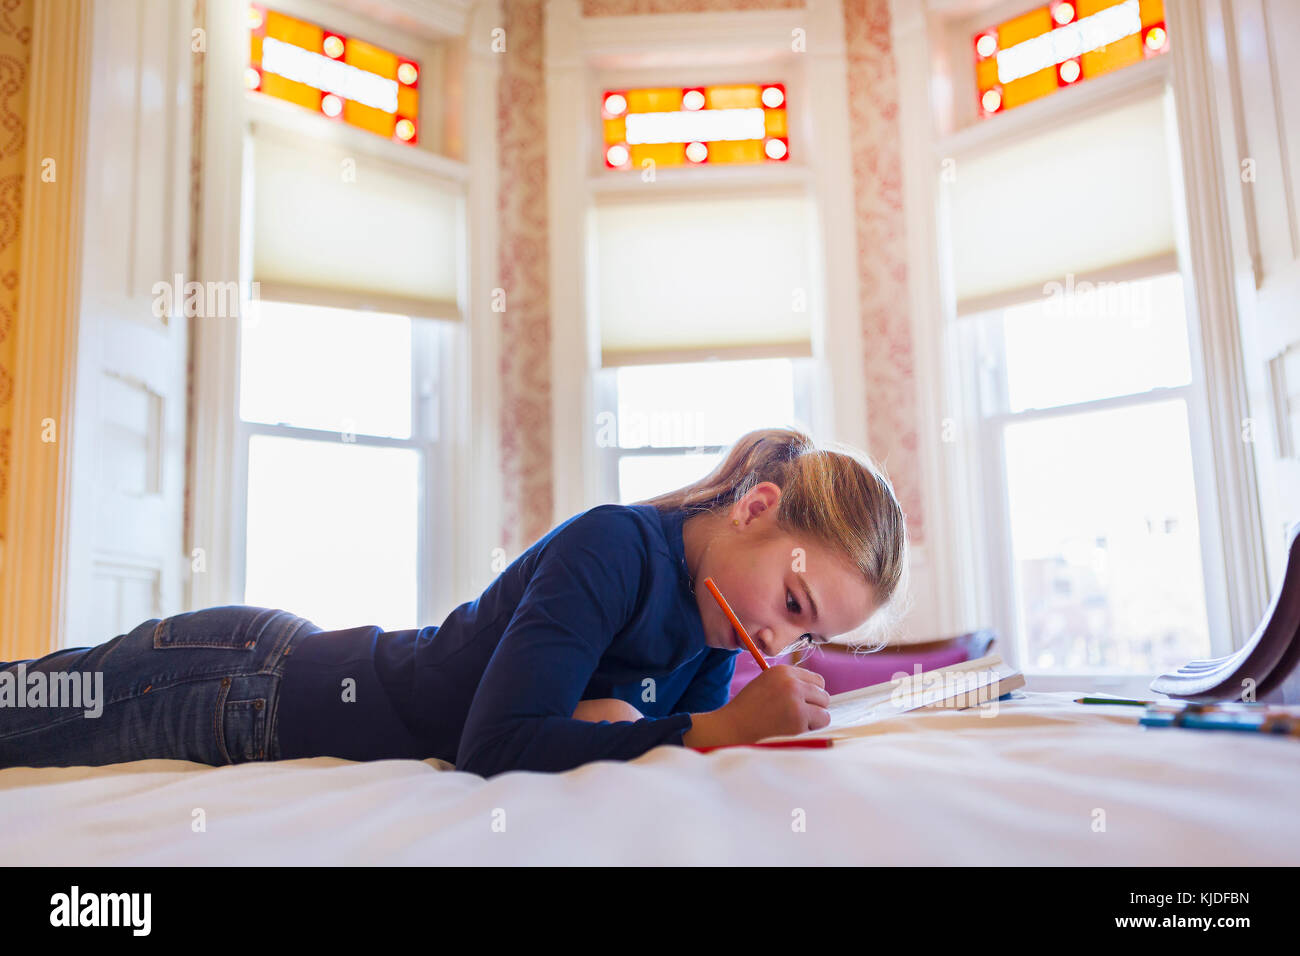 Caucasian girl laying on bed writing in notebook Stock Photo